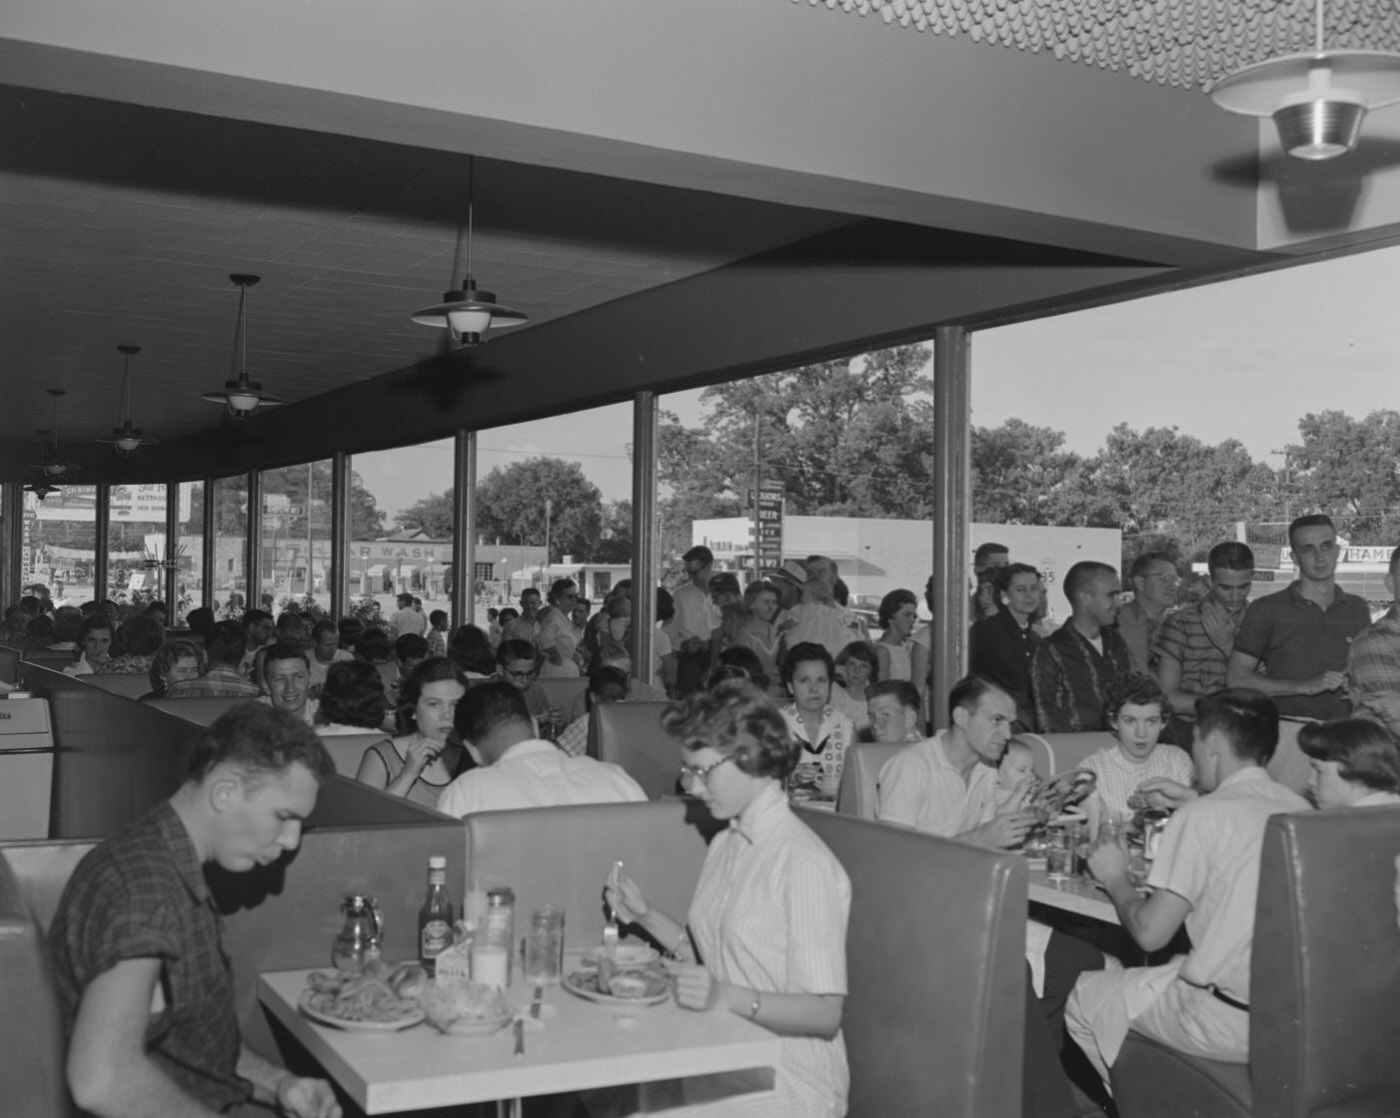 Customers Dining Inside Youngblood's Fried Chicken Restaurant, Austin, 1958.